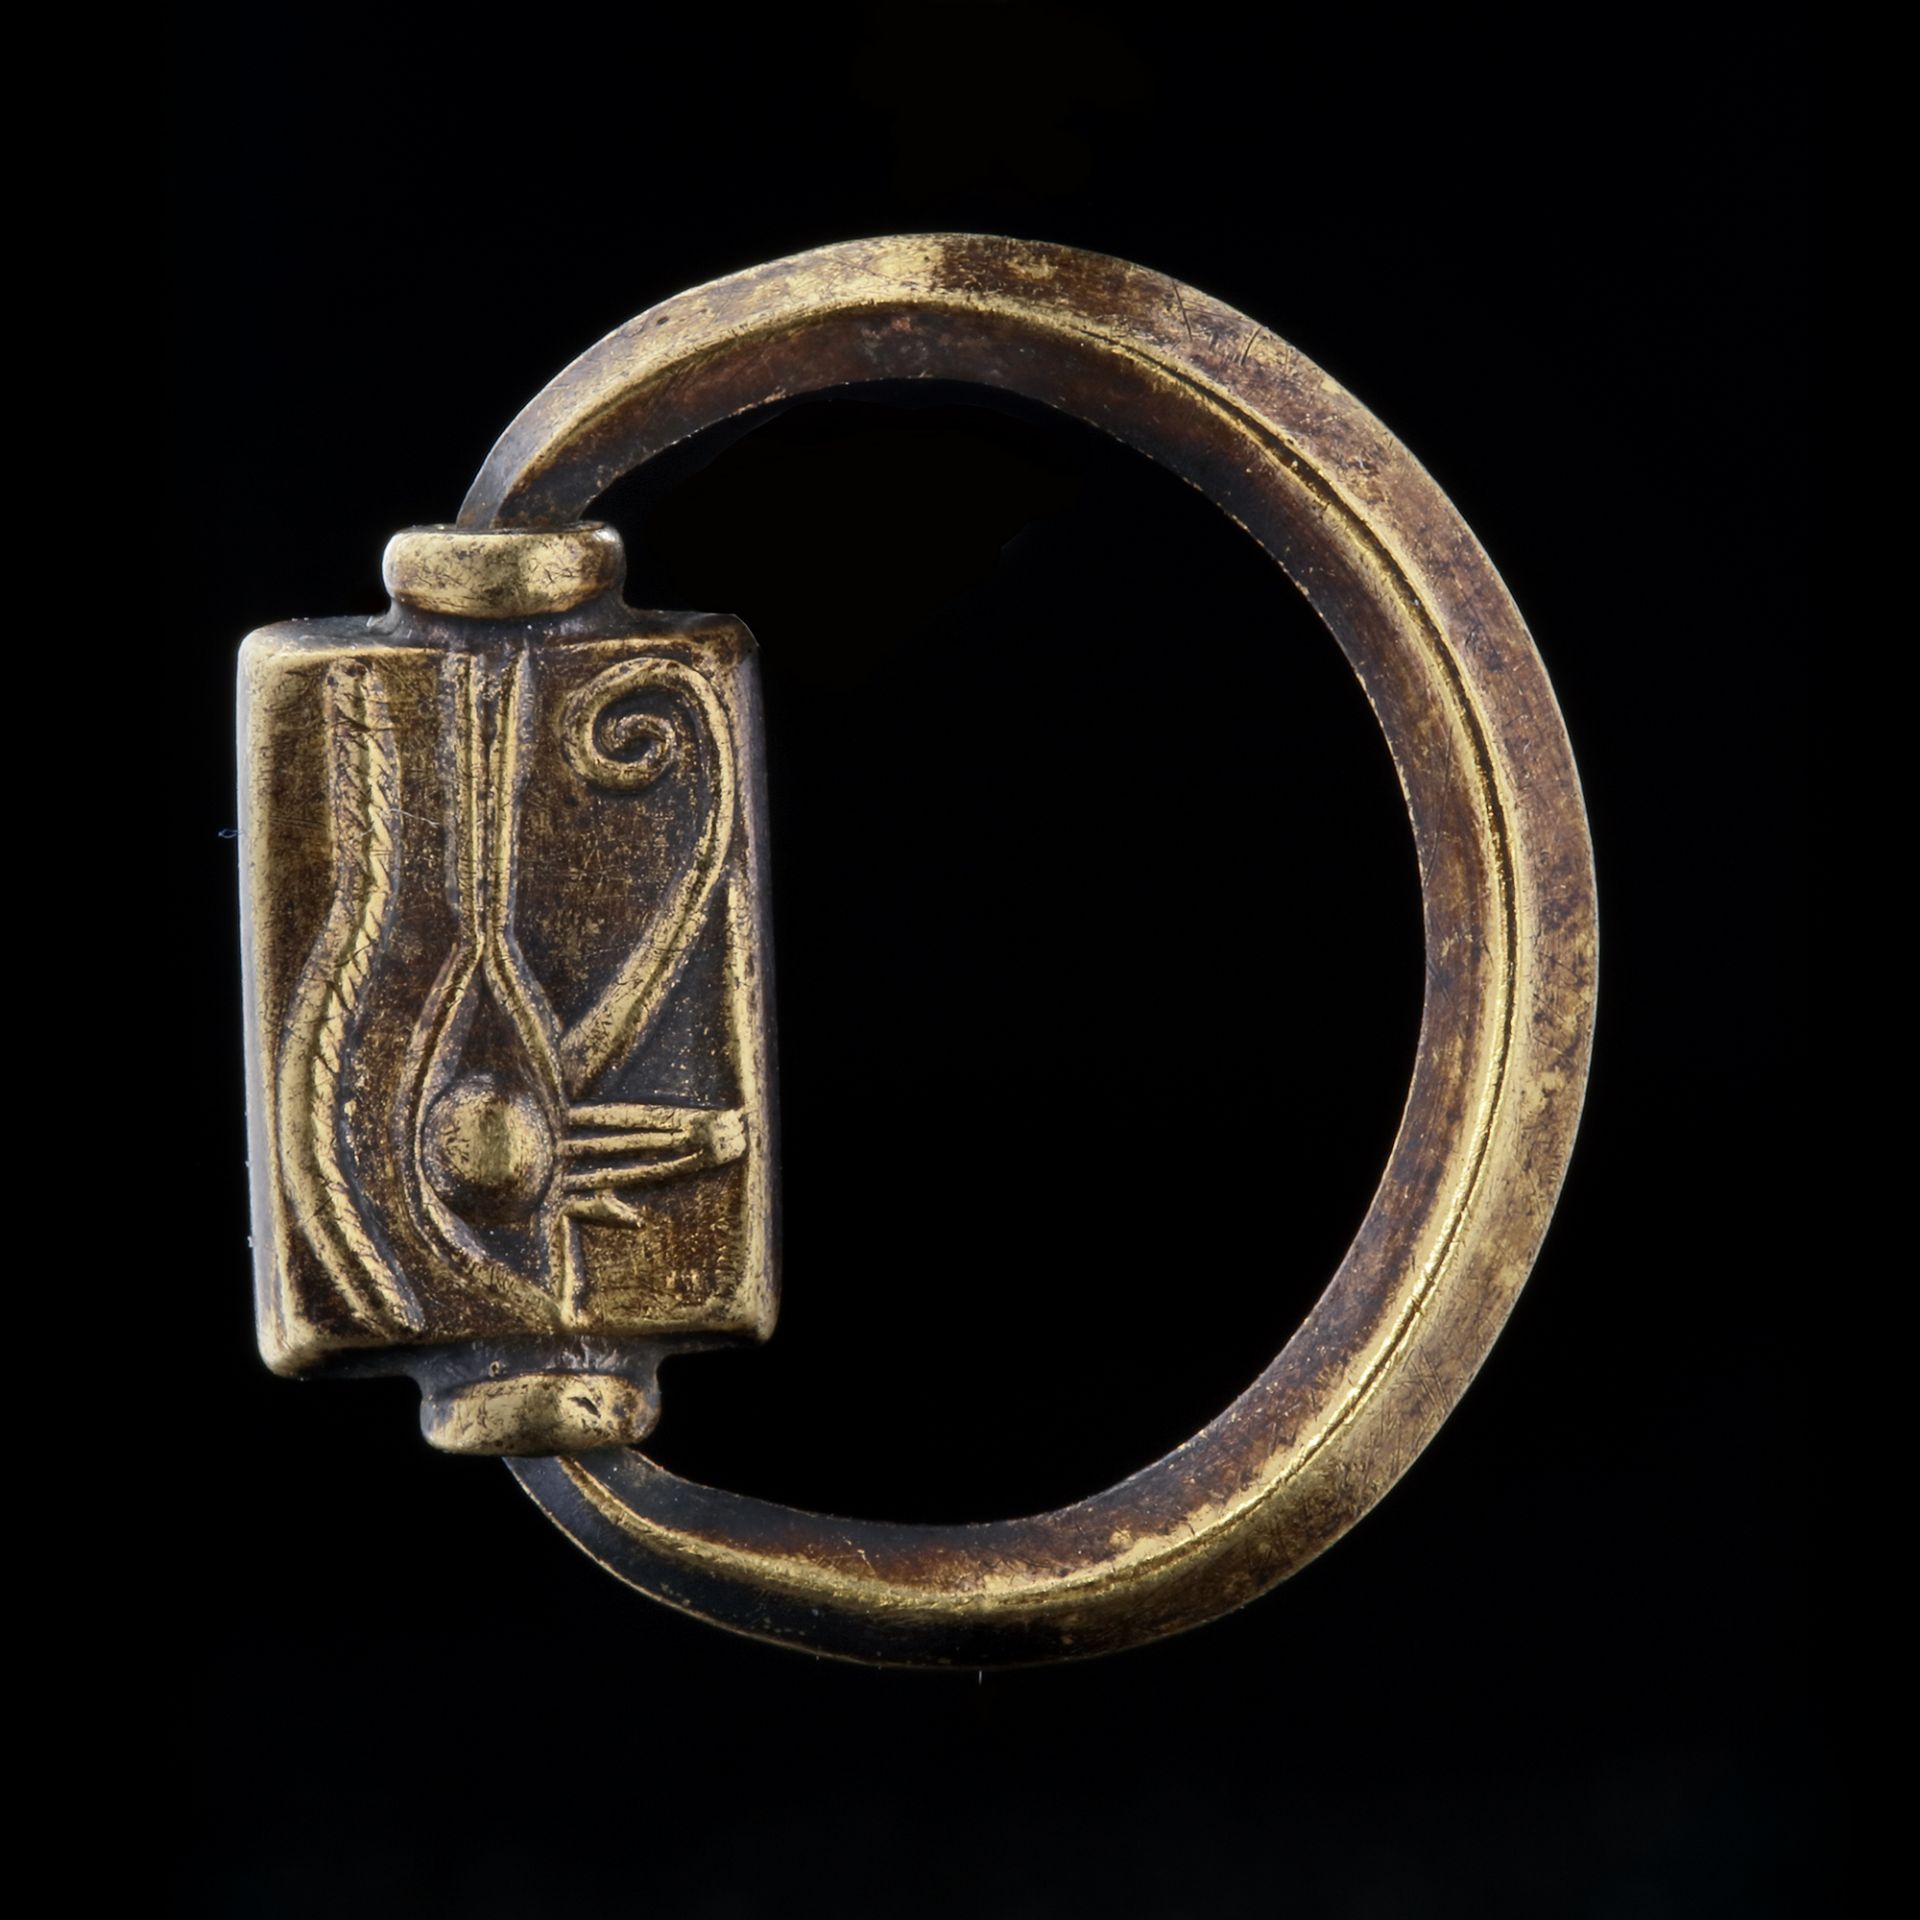 A PHOENICIAN RING IN GOLD WITH AN EYE OF HORUS, 6TH-7TH CENTURY CENTURY BC - Image 4 of 4